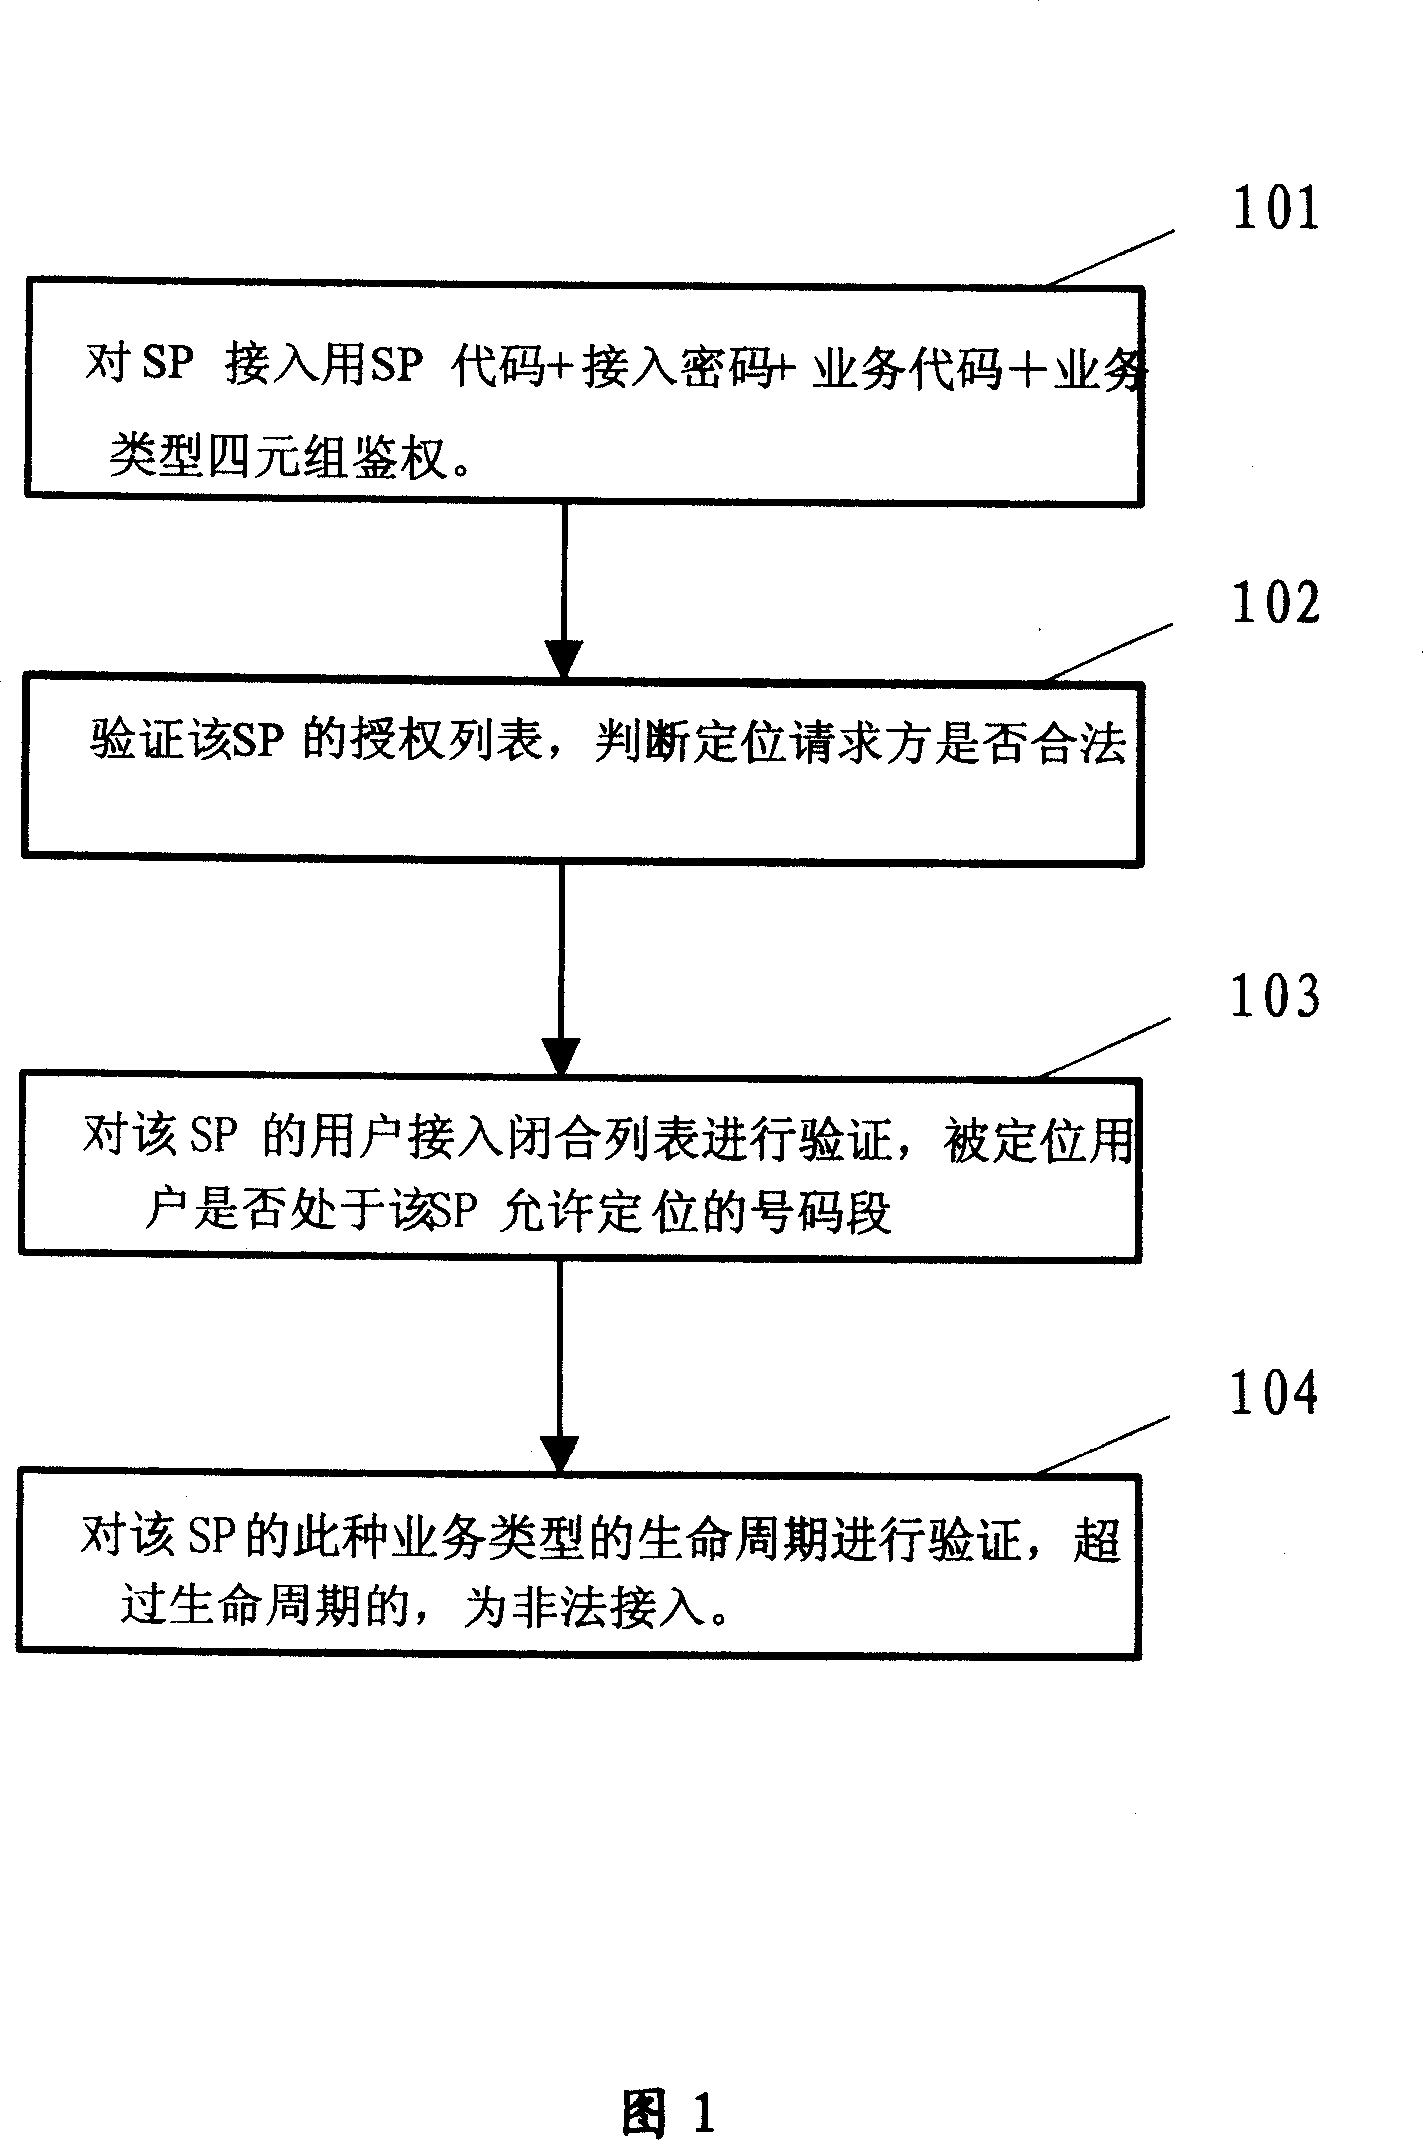 Privacy control method for position service